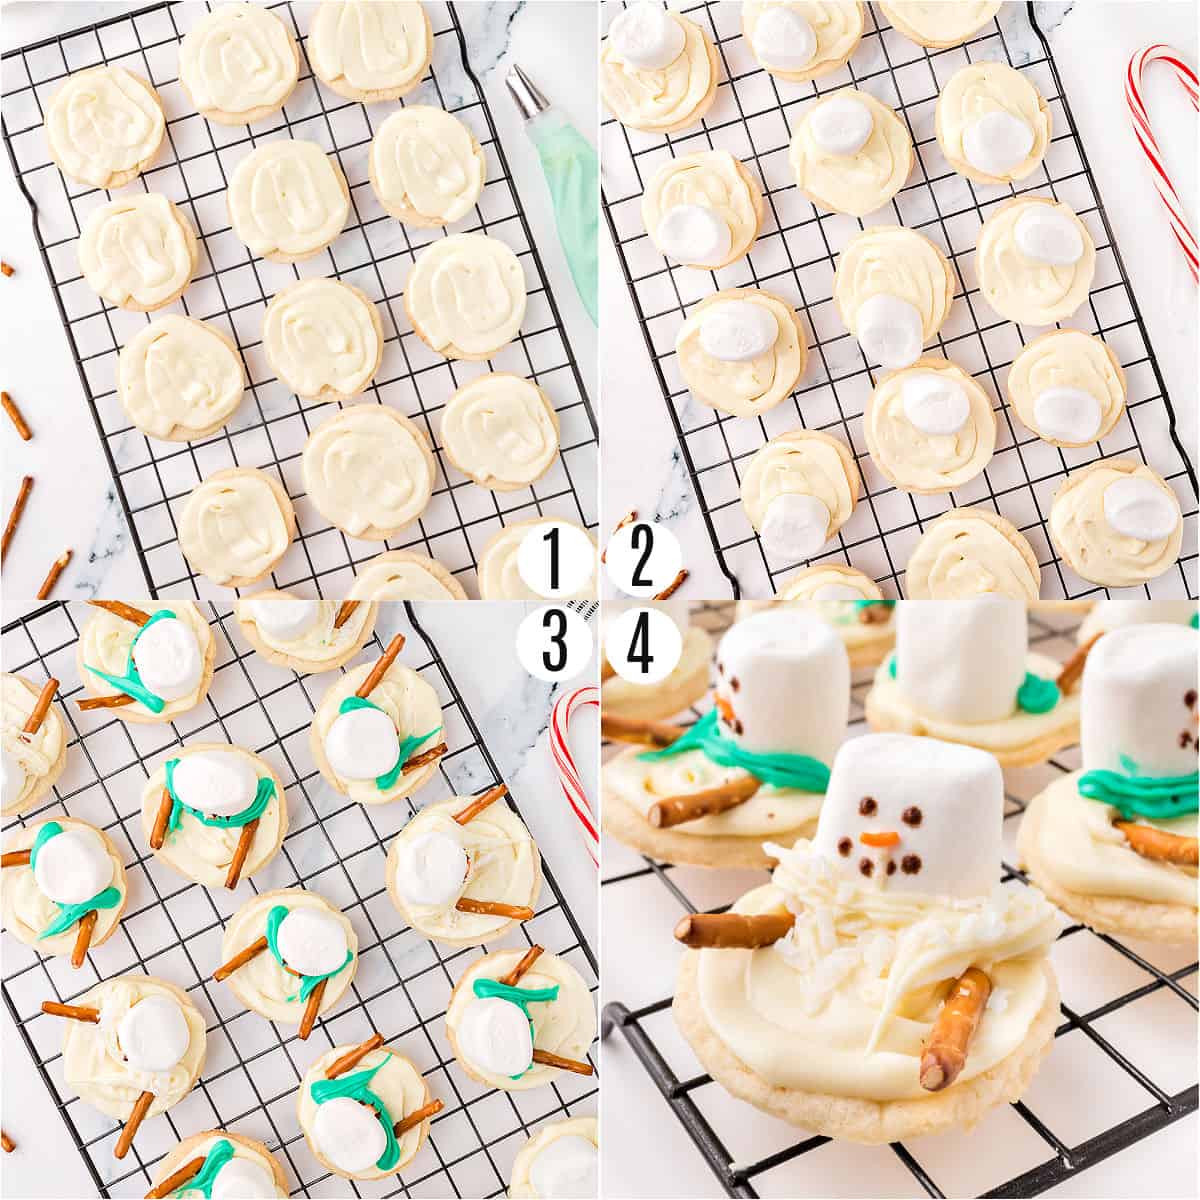 Step by step photos showing how to make melting snowman cookies.